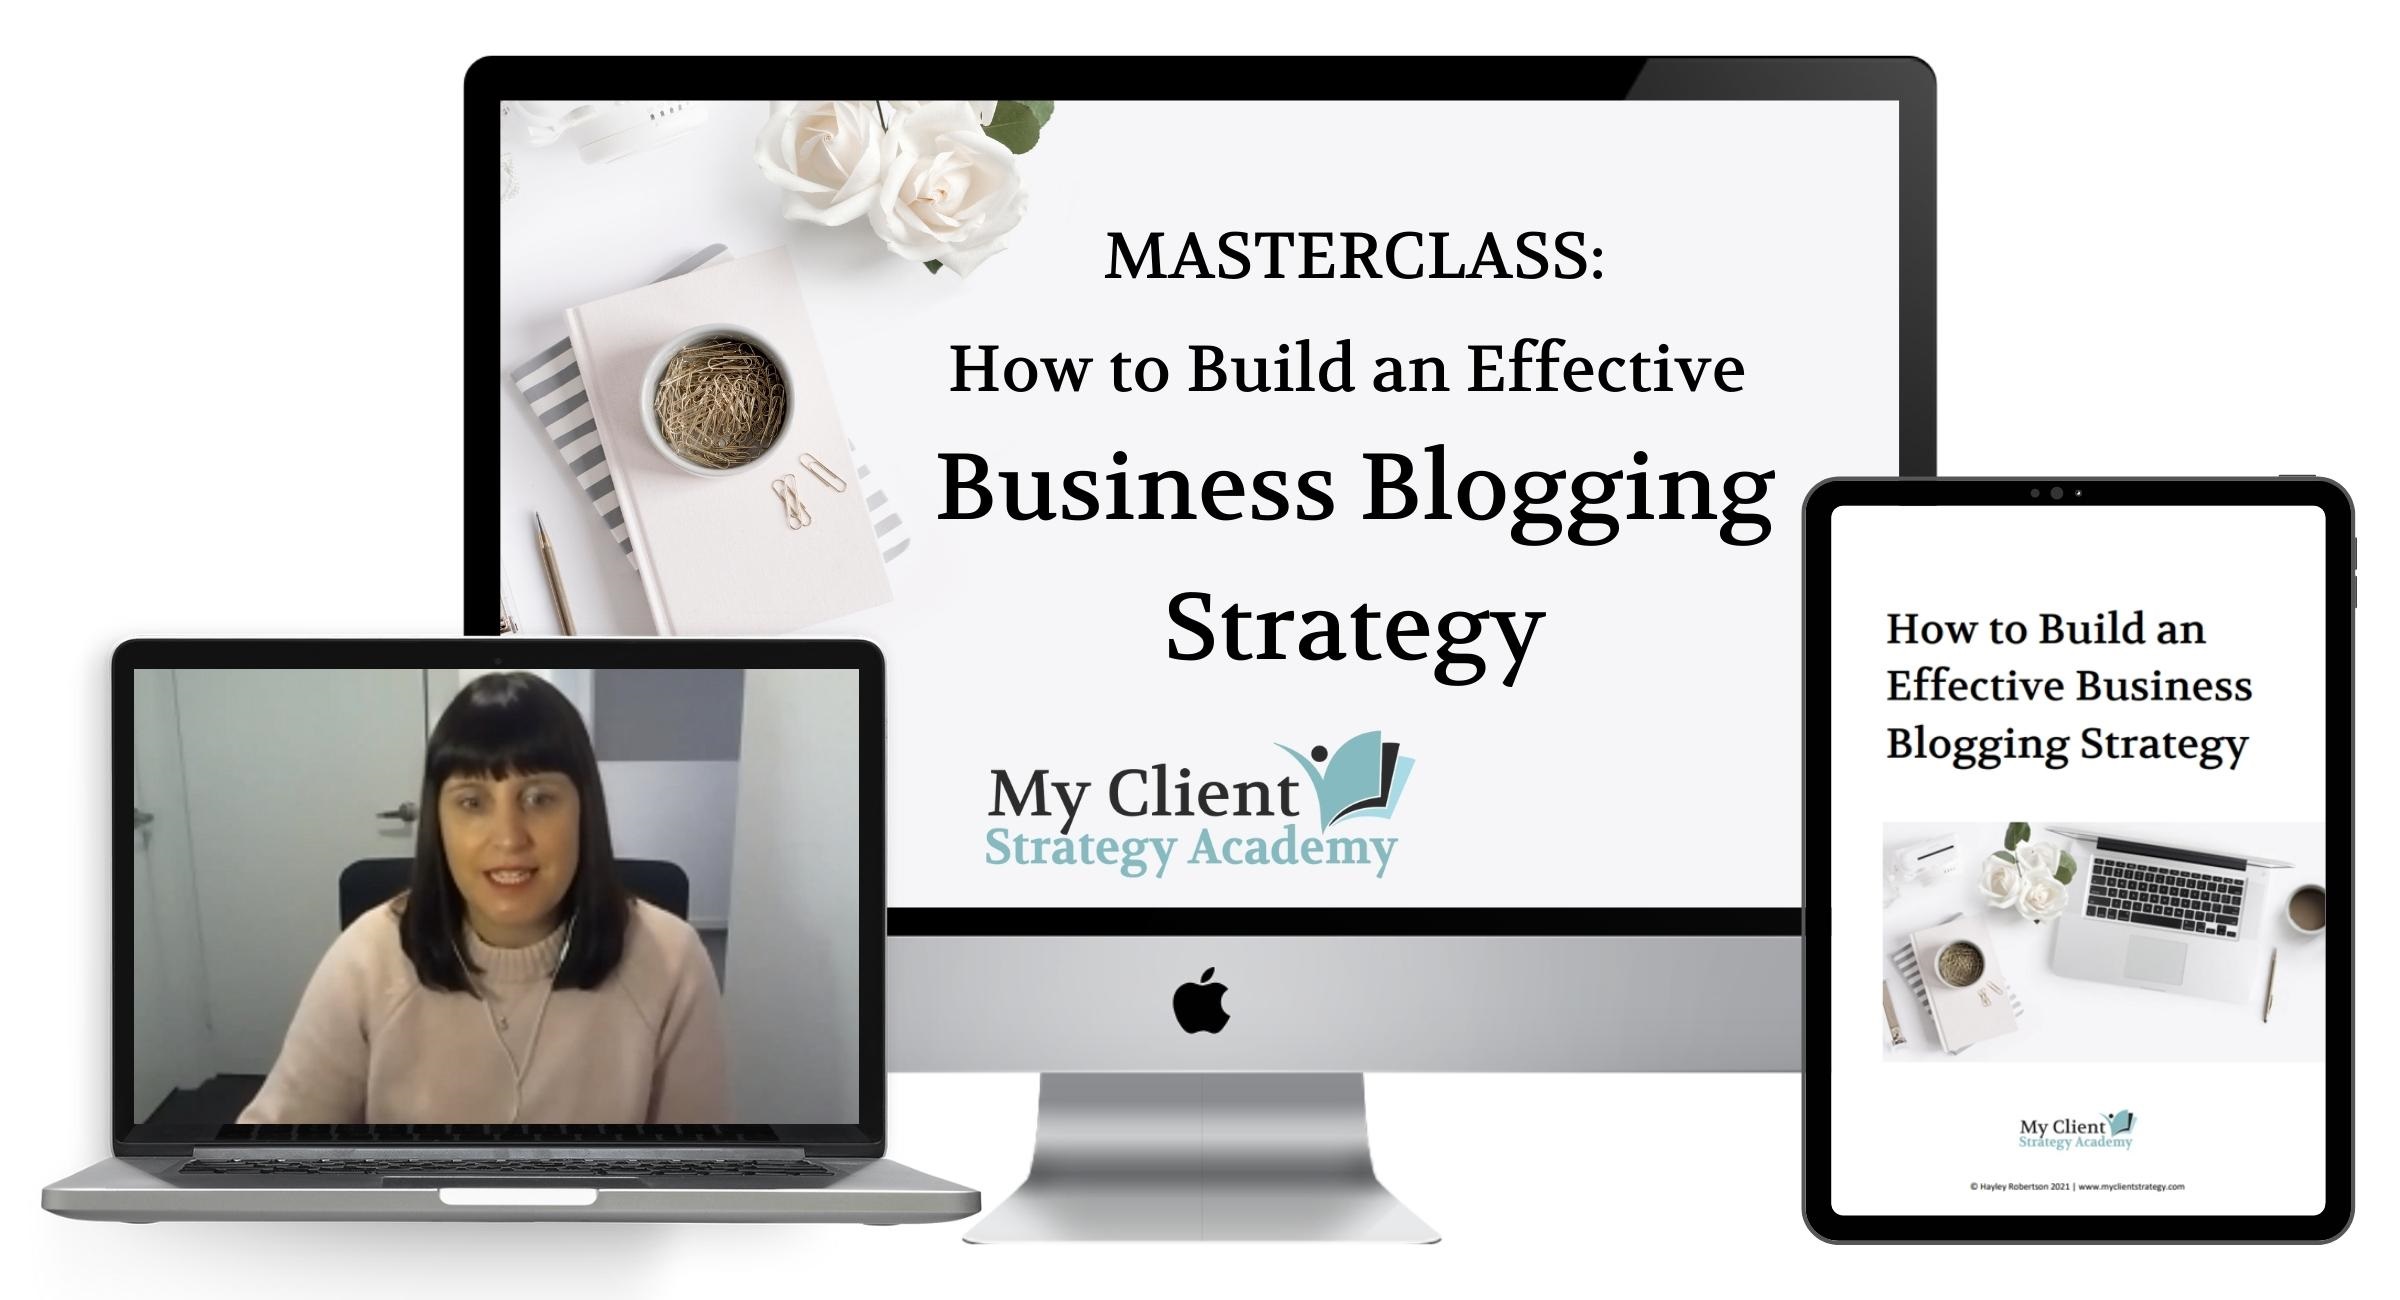 How to Build an Effective Business Blogging Strategy